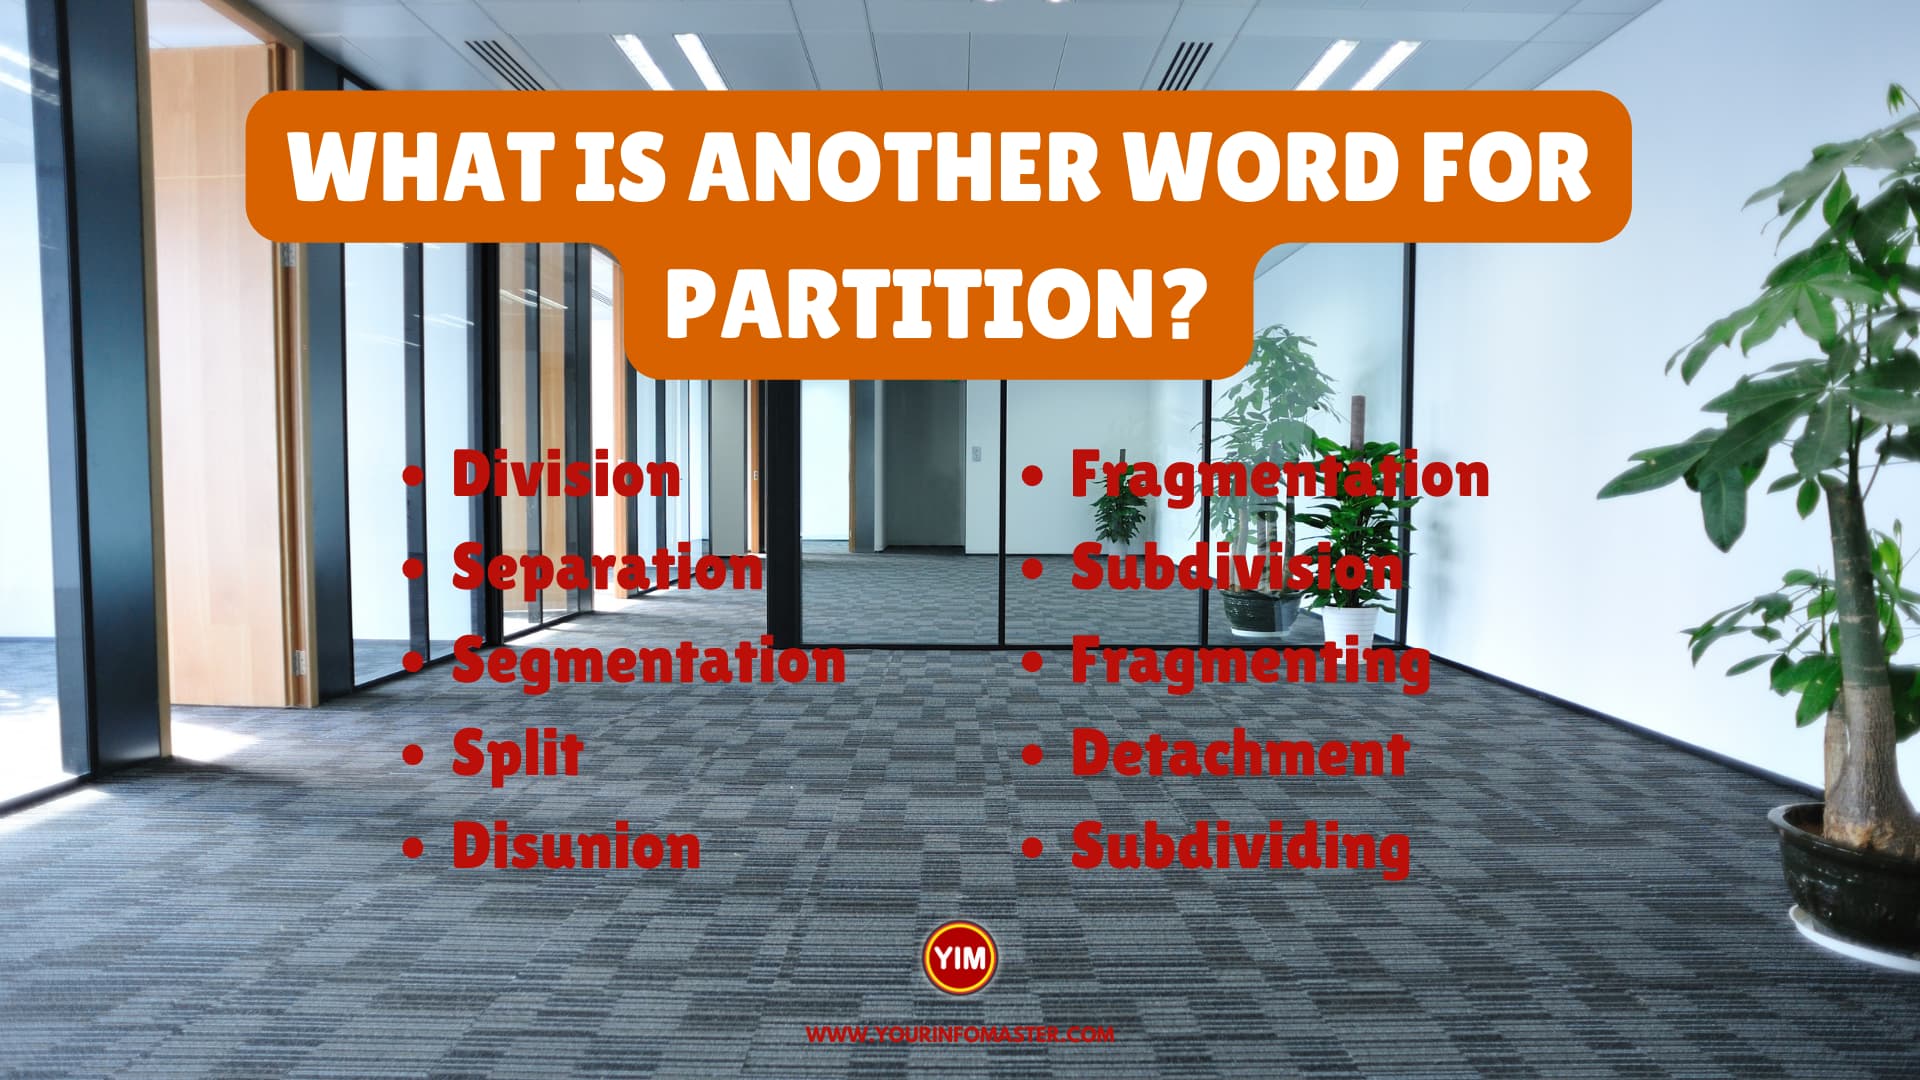 What is another word for Partition